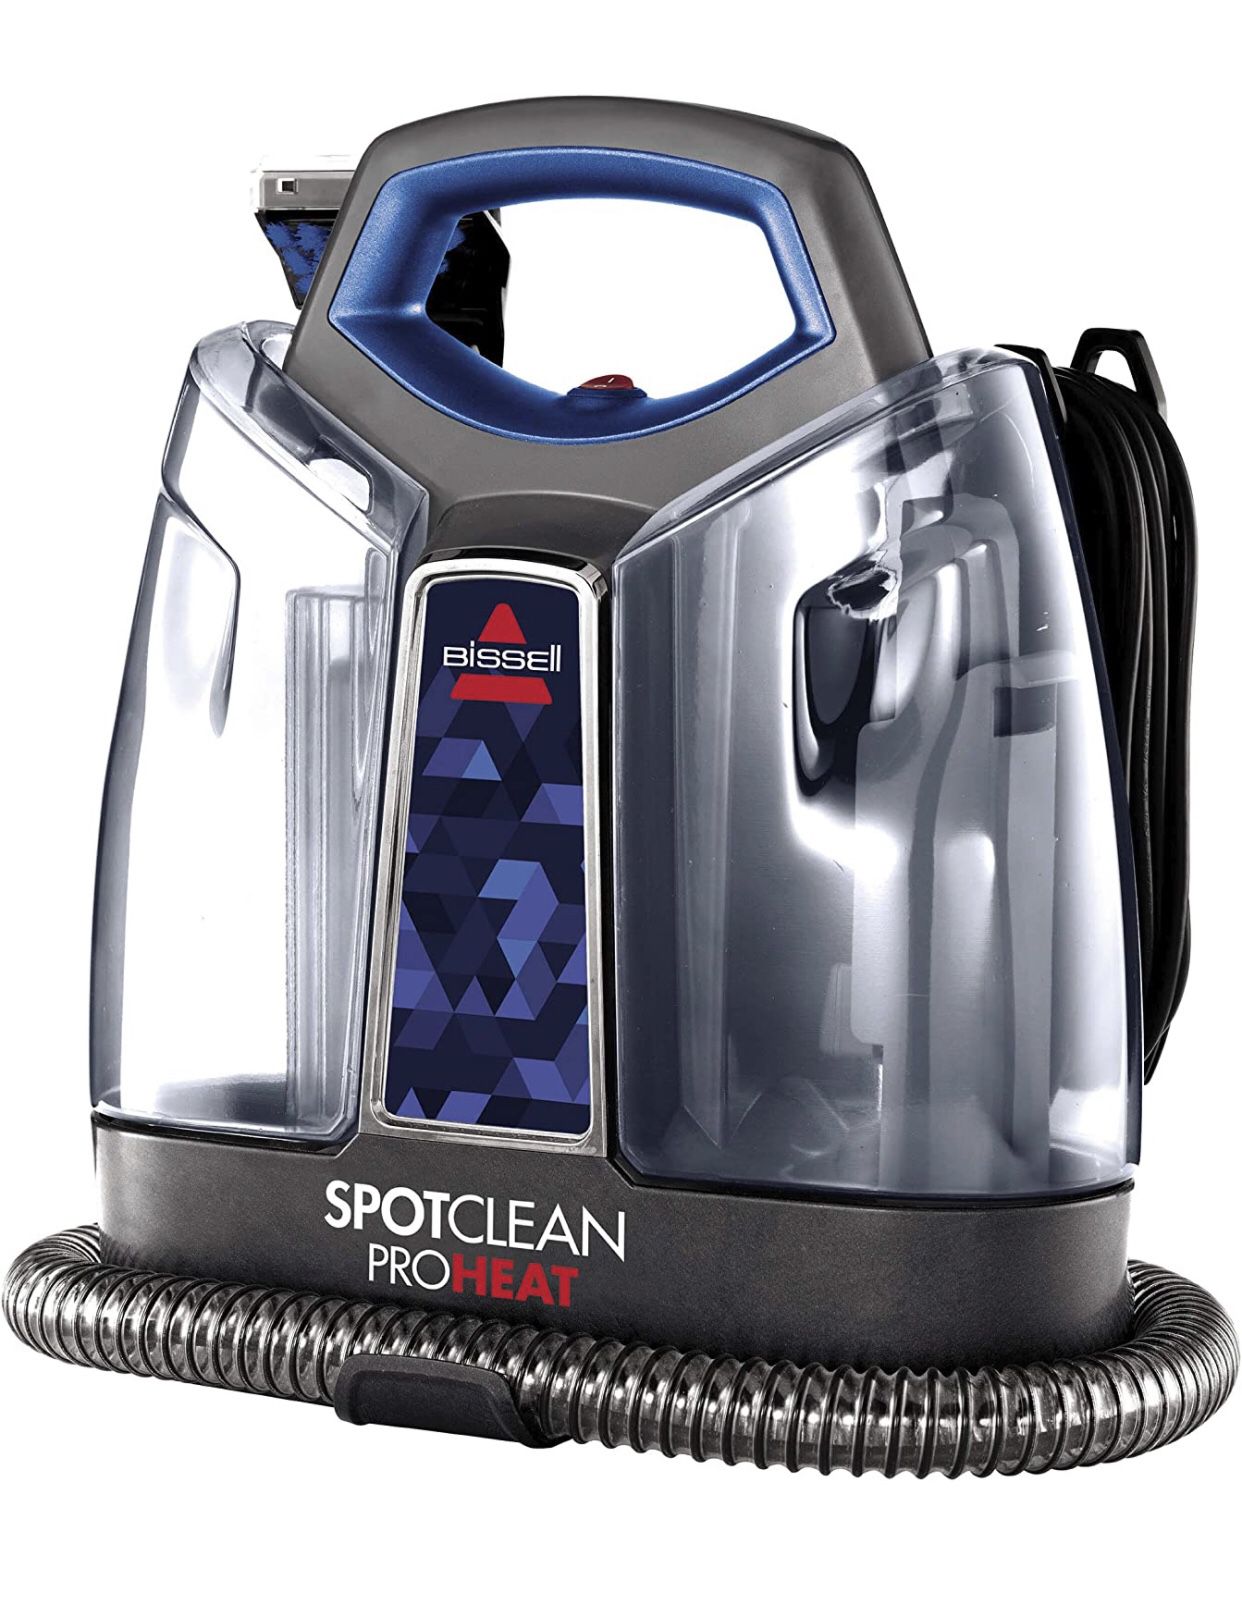 NEW! Bissell SpotClean ProHeat Portable Spot and Stain Carpet Cleaner, 2694, Blue